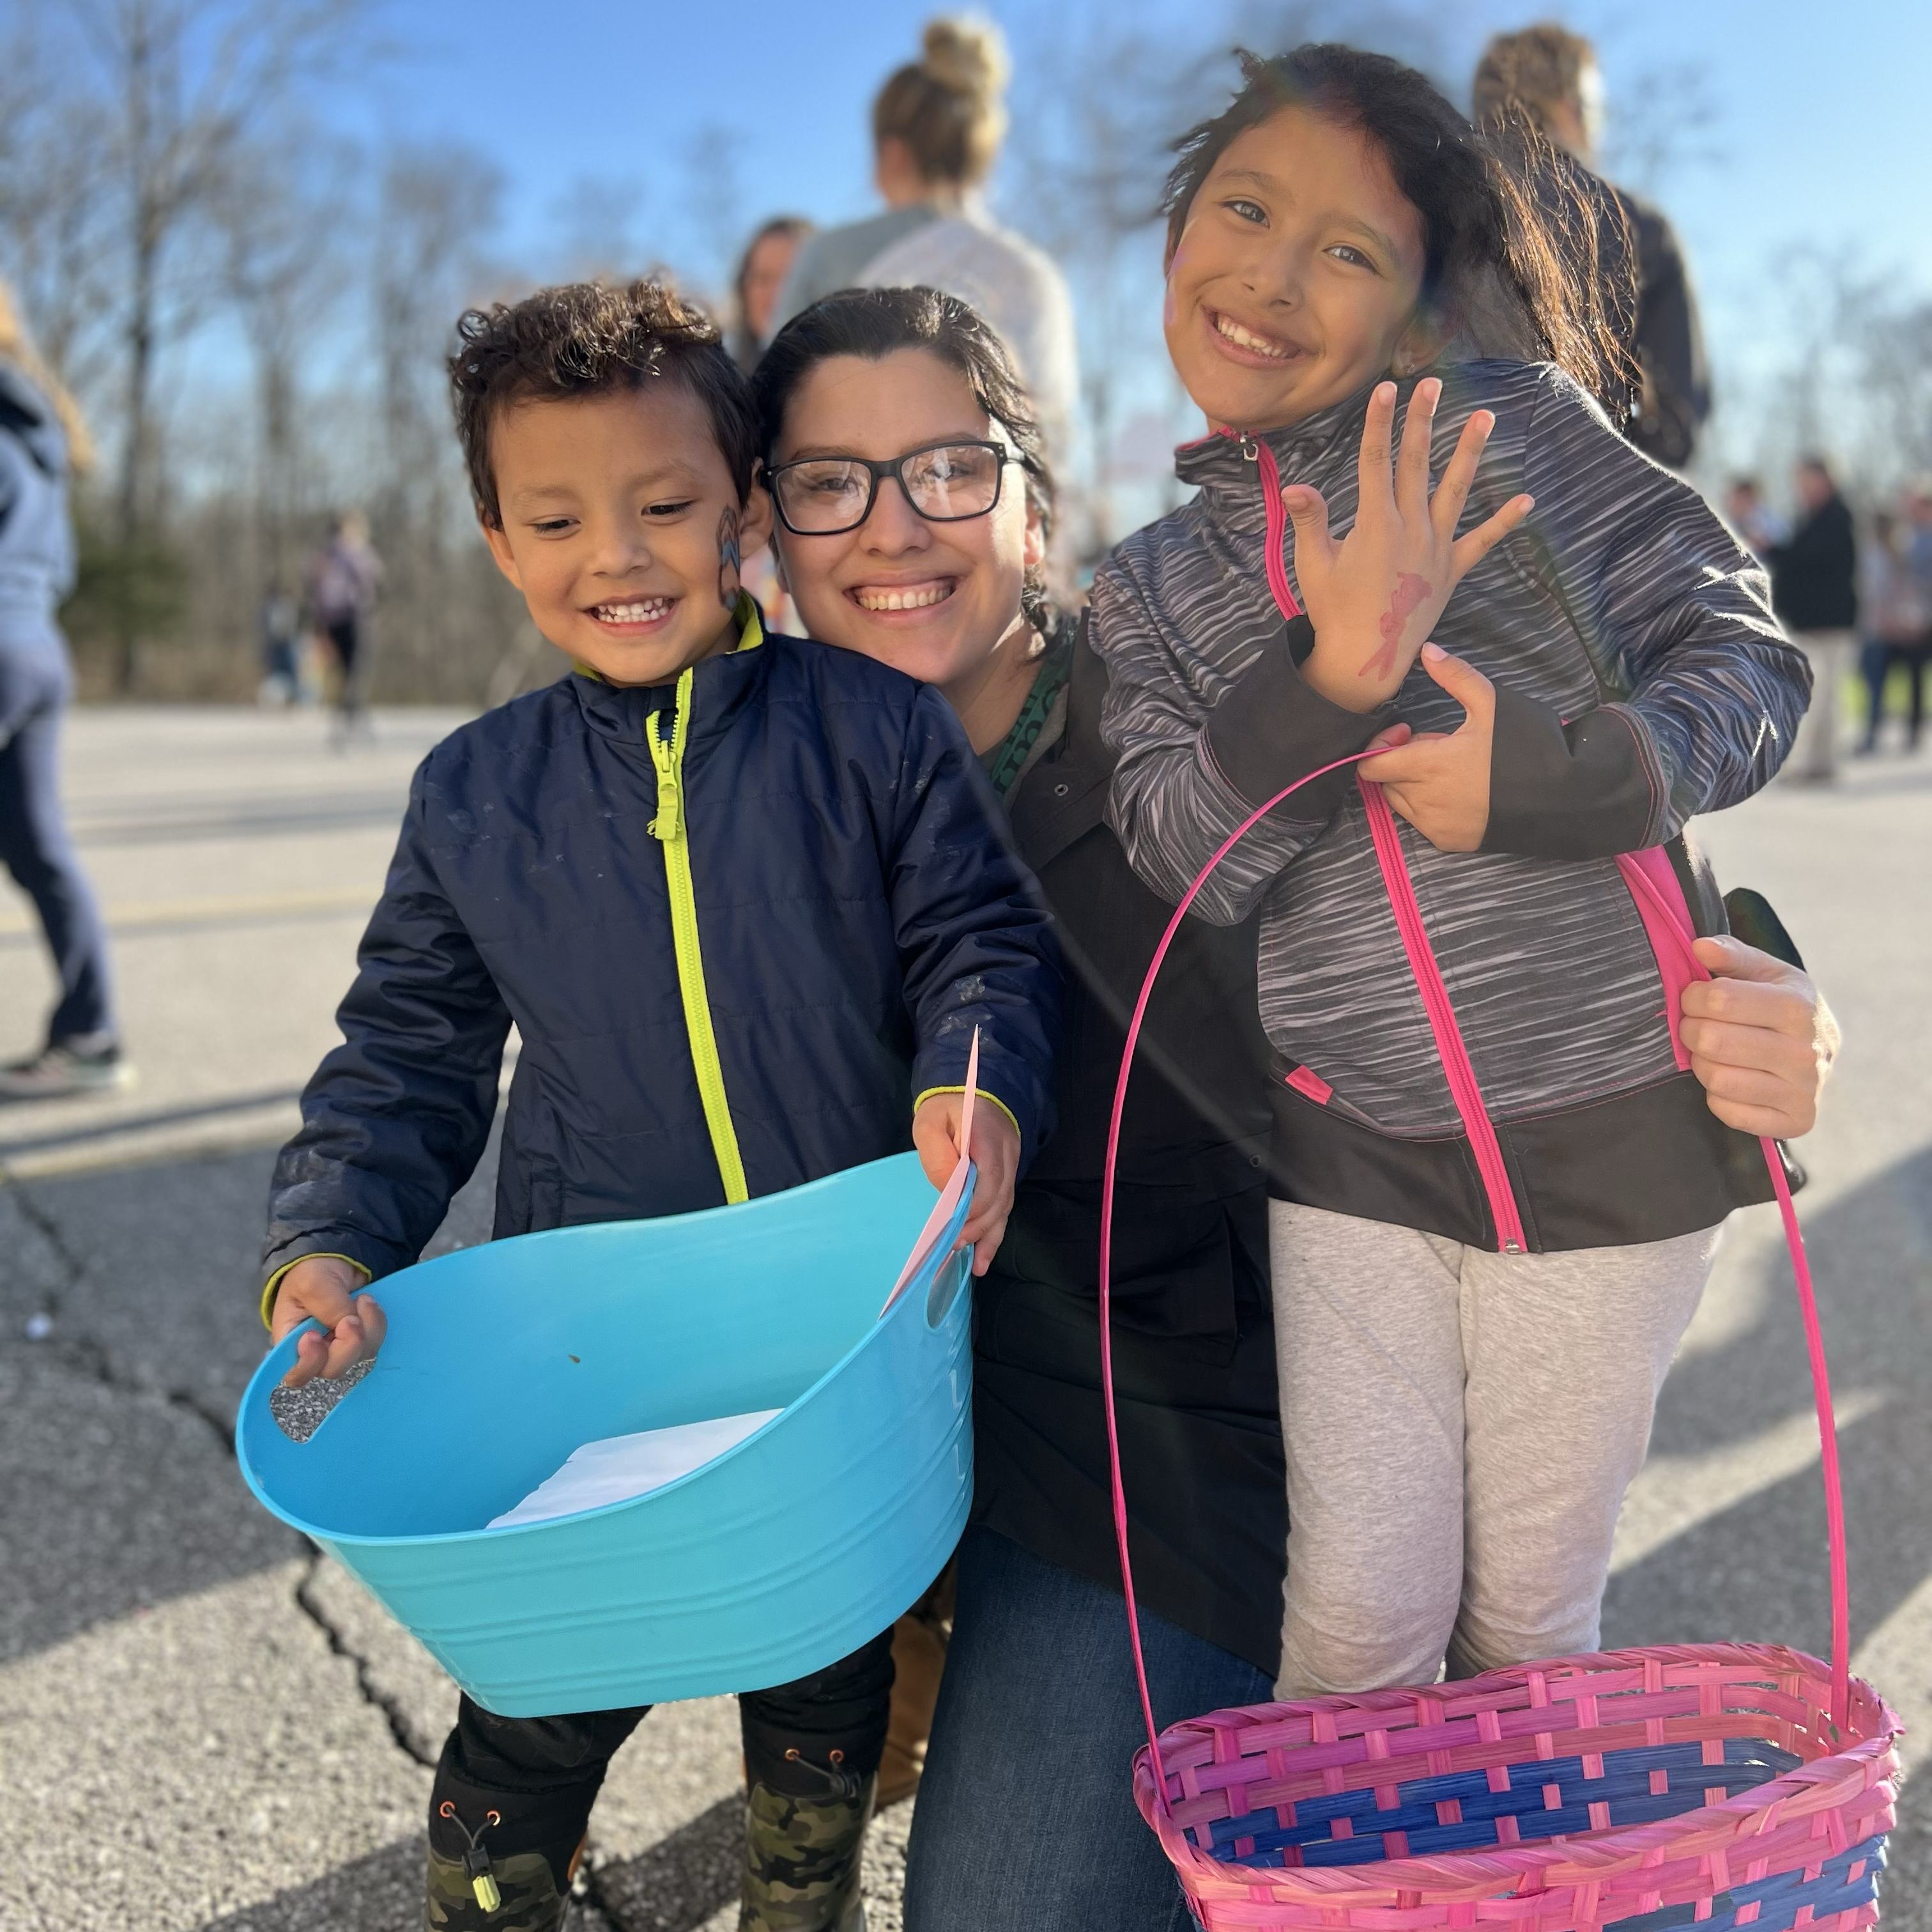 Two children pose with an adult during an Easter egg hunt event.